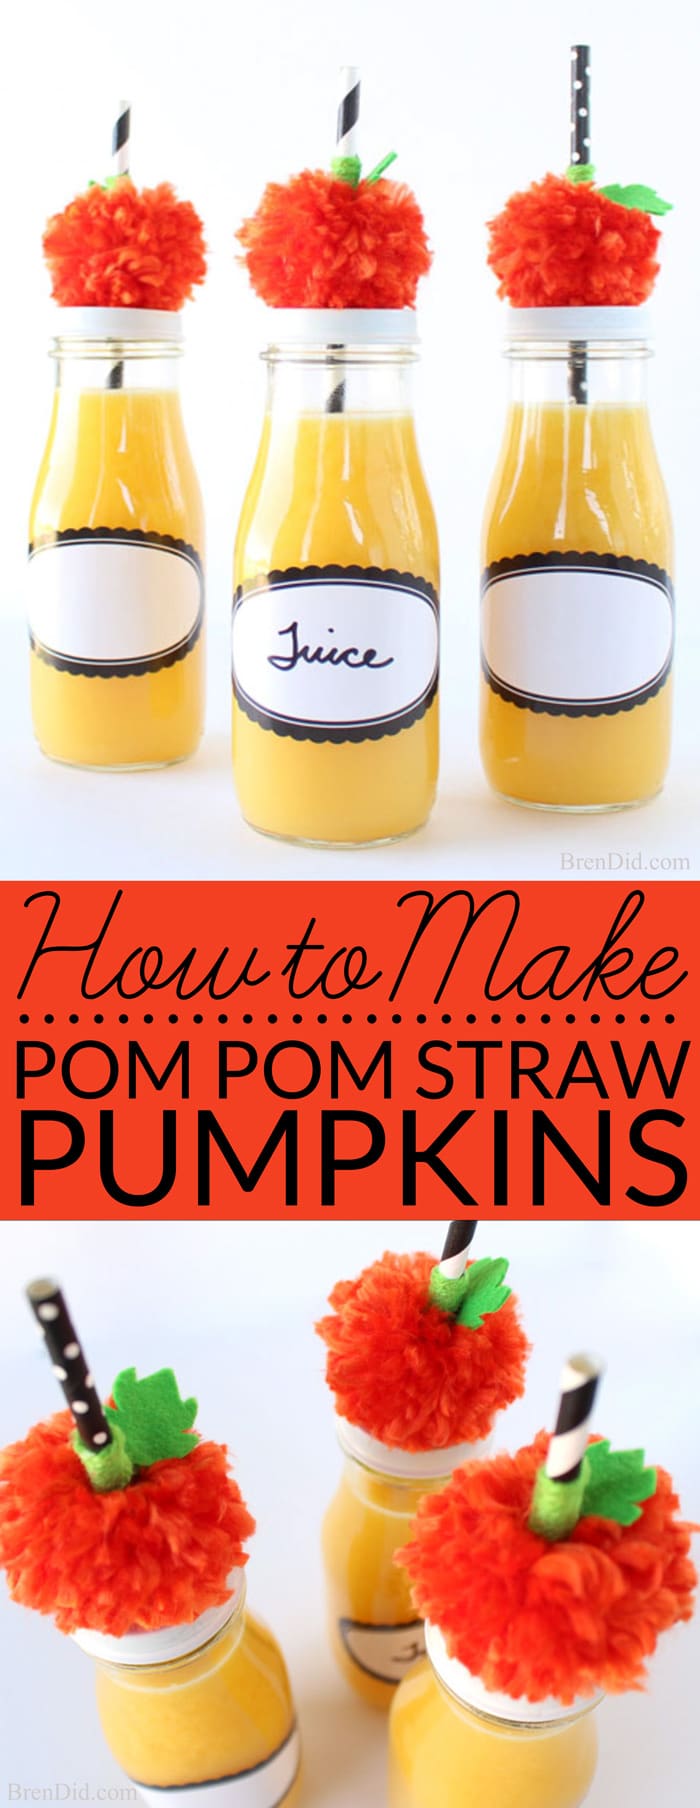 Pumpkin Pom Pom Straws – Make this simple Halloween Pumpkin Craft with no special equipment! All you need is a fork, yarn and craft felt to make this adorable decoration for your Halloween party.